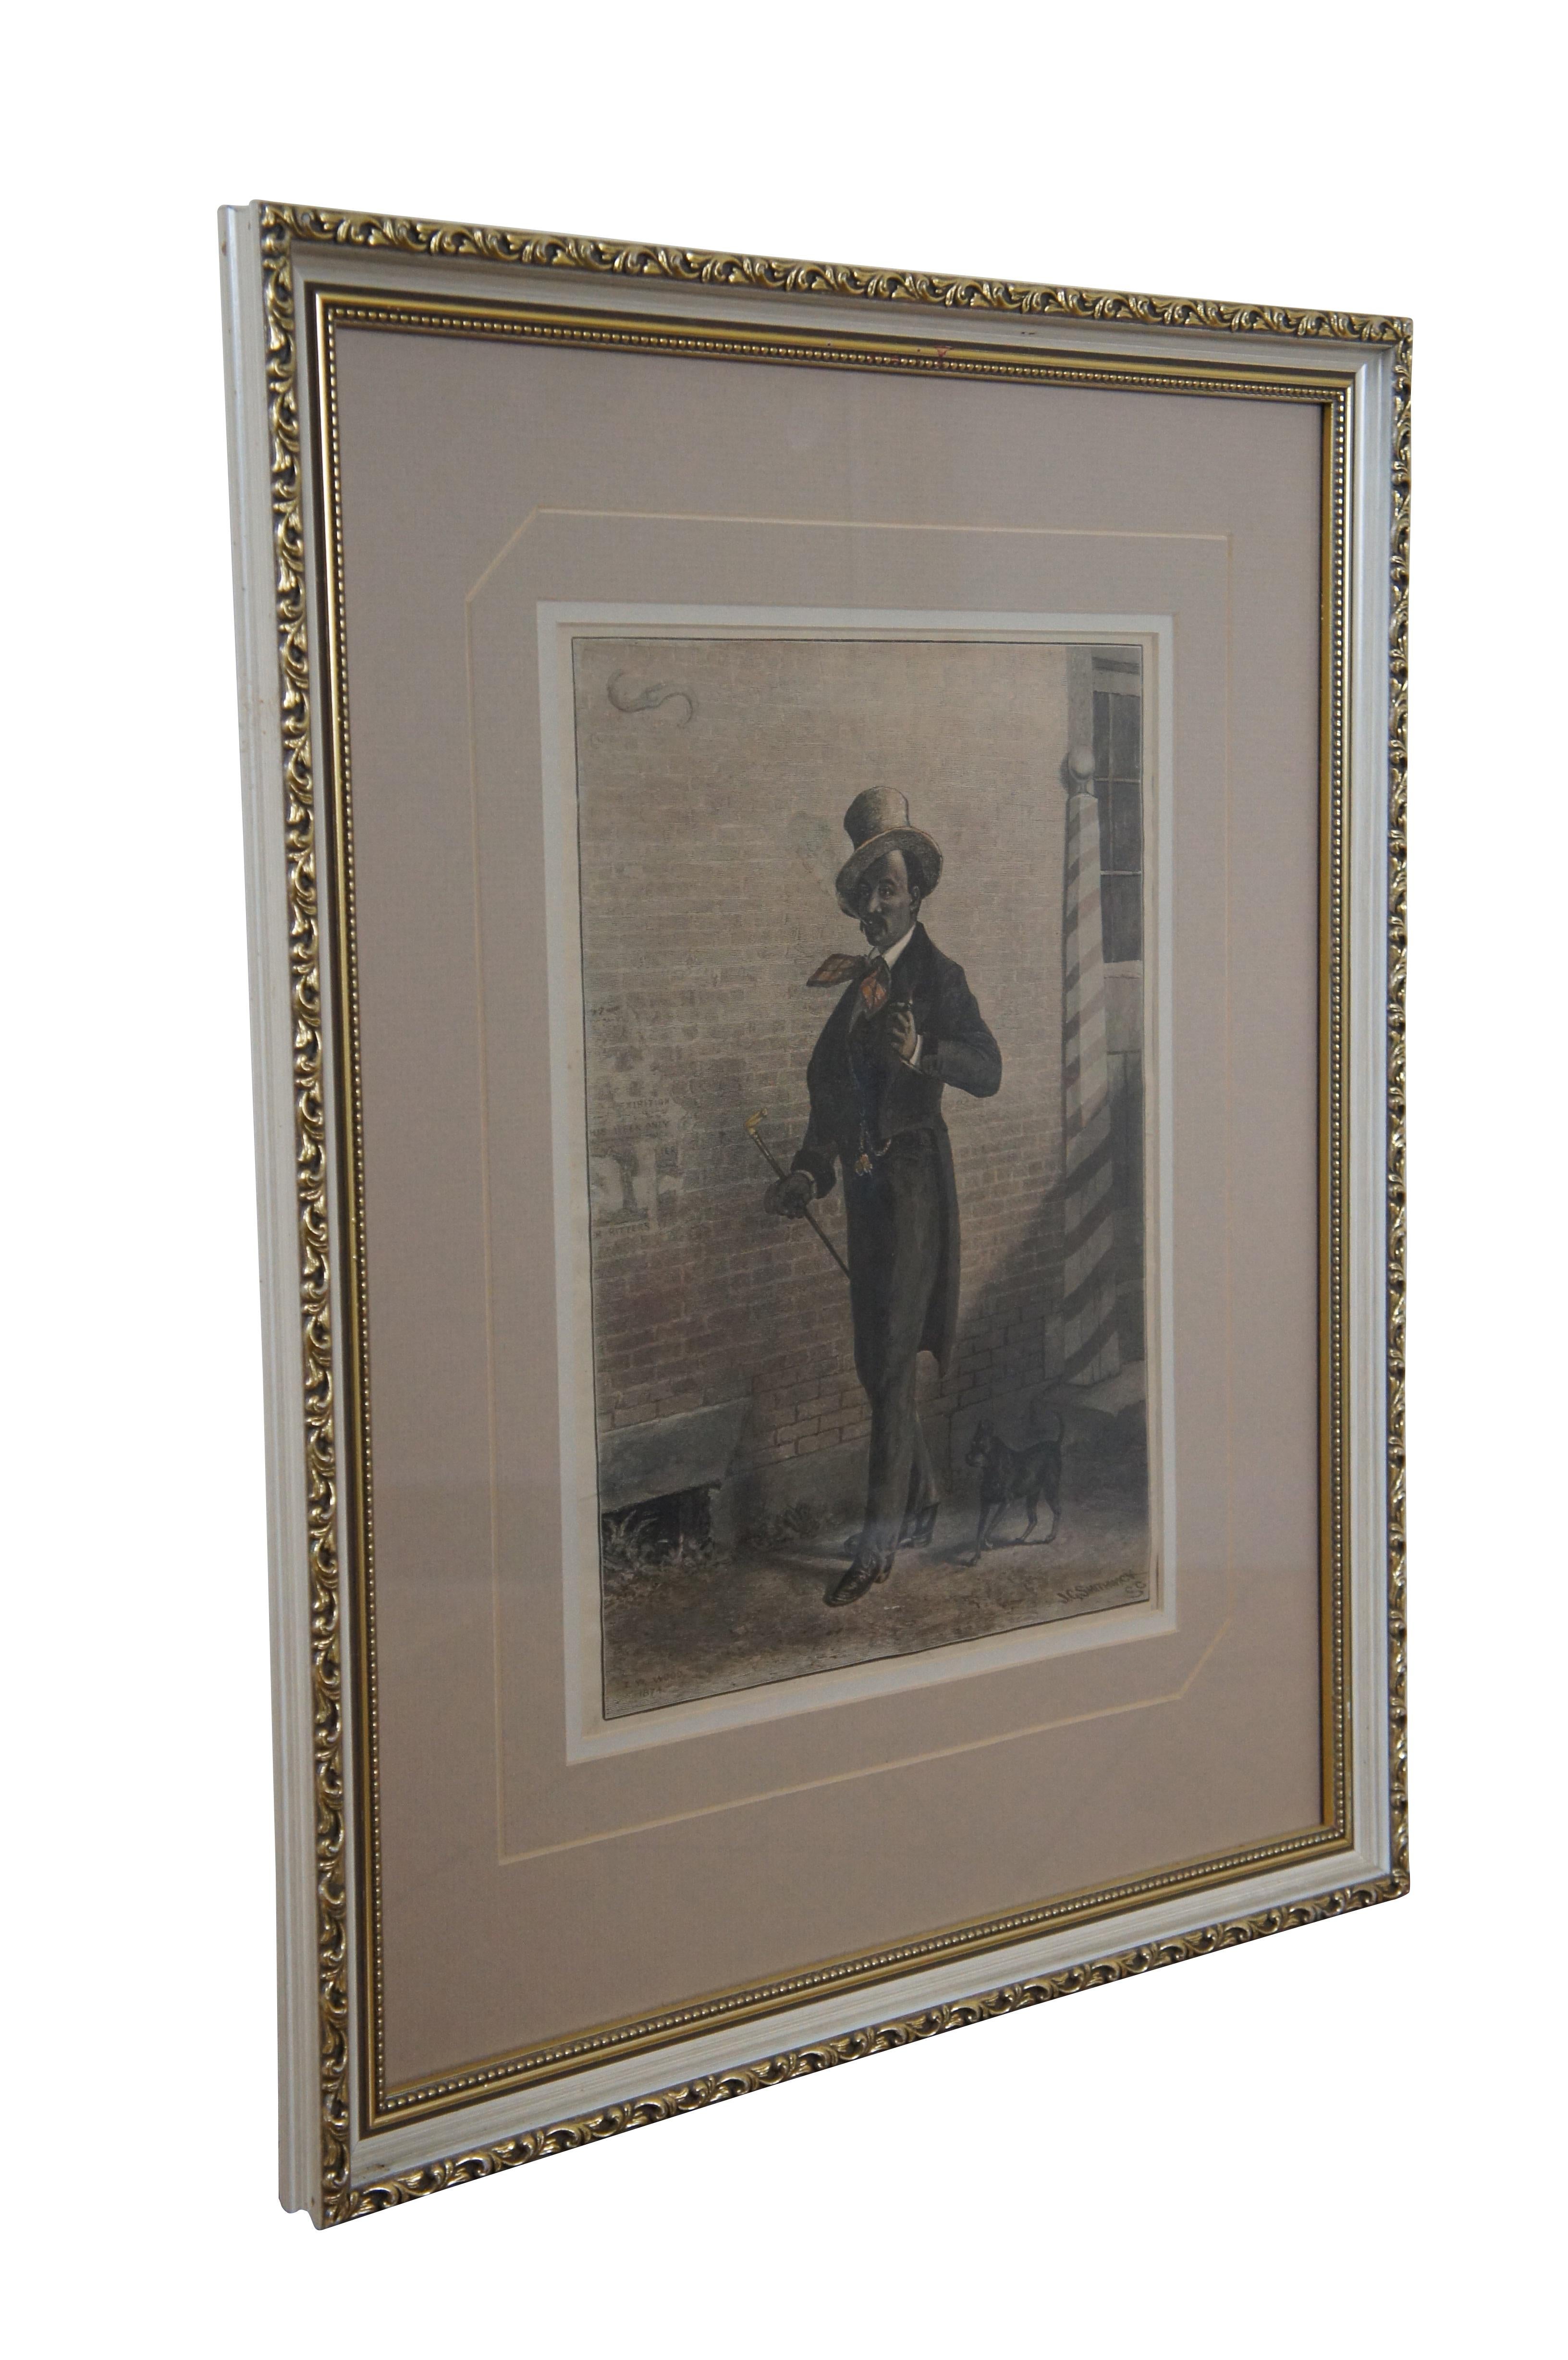 Victorian 1870s Antique Southern Sketches A Gentleman of Color Black Gentleman Engraving